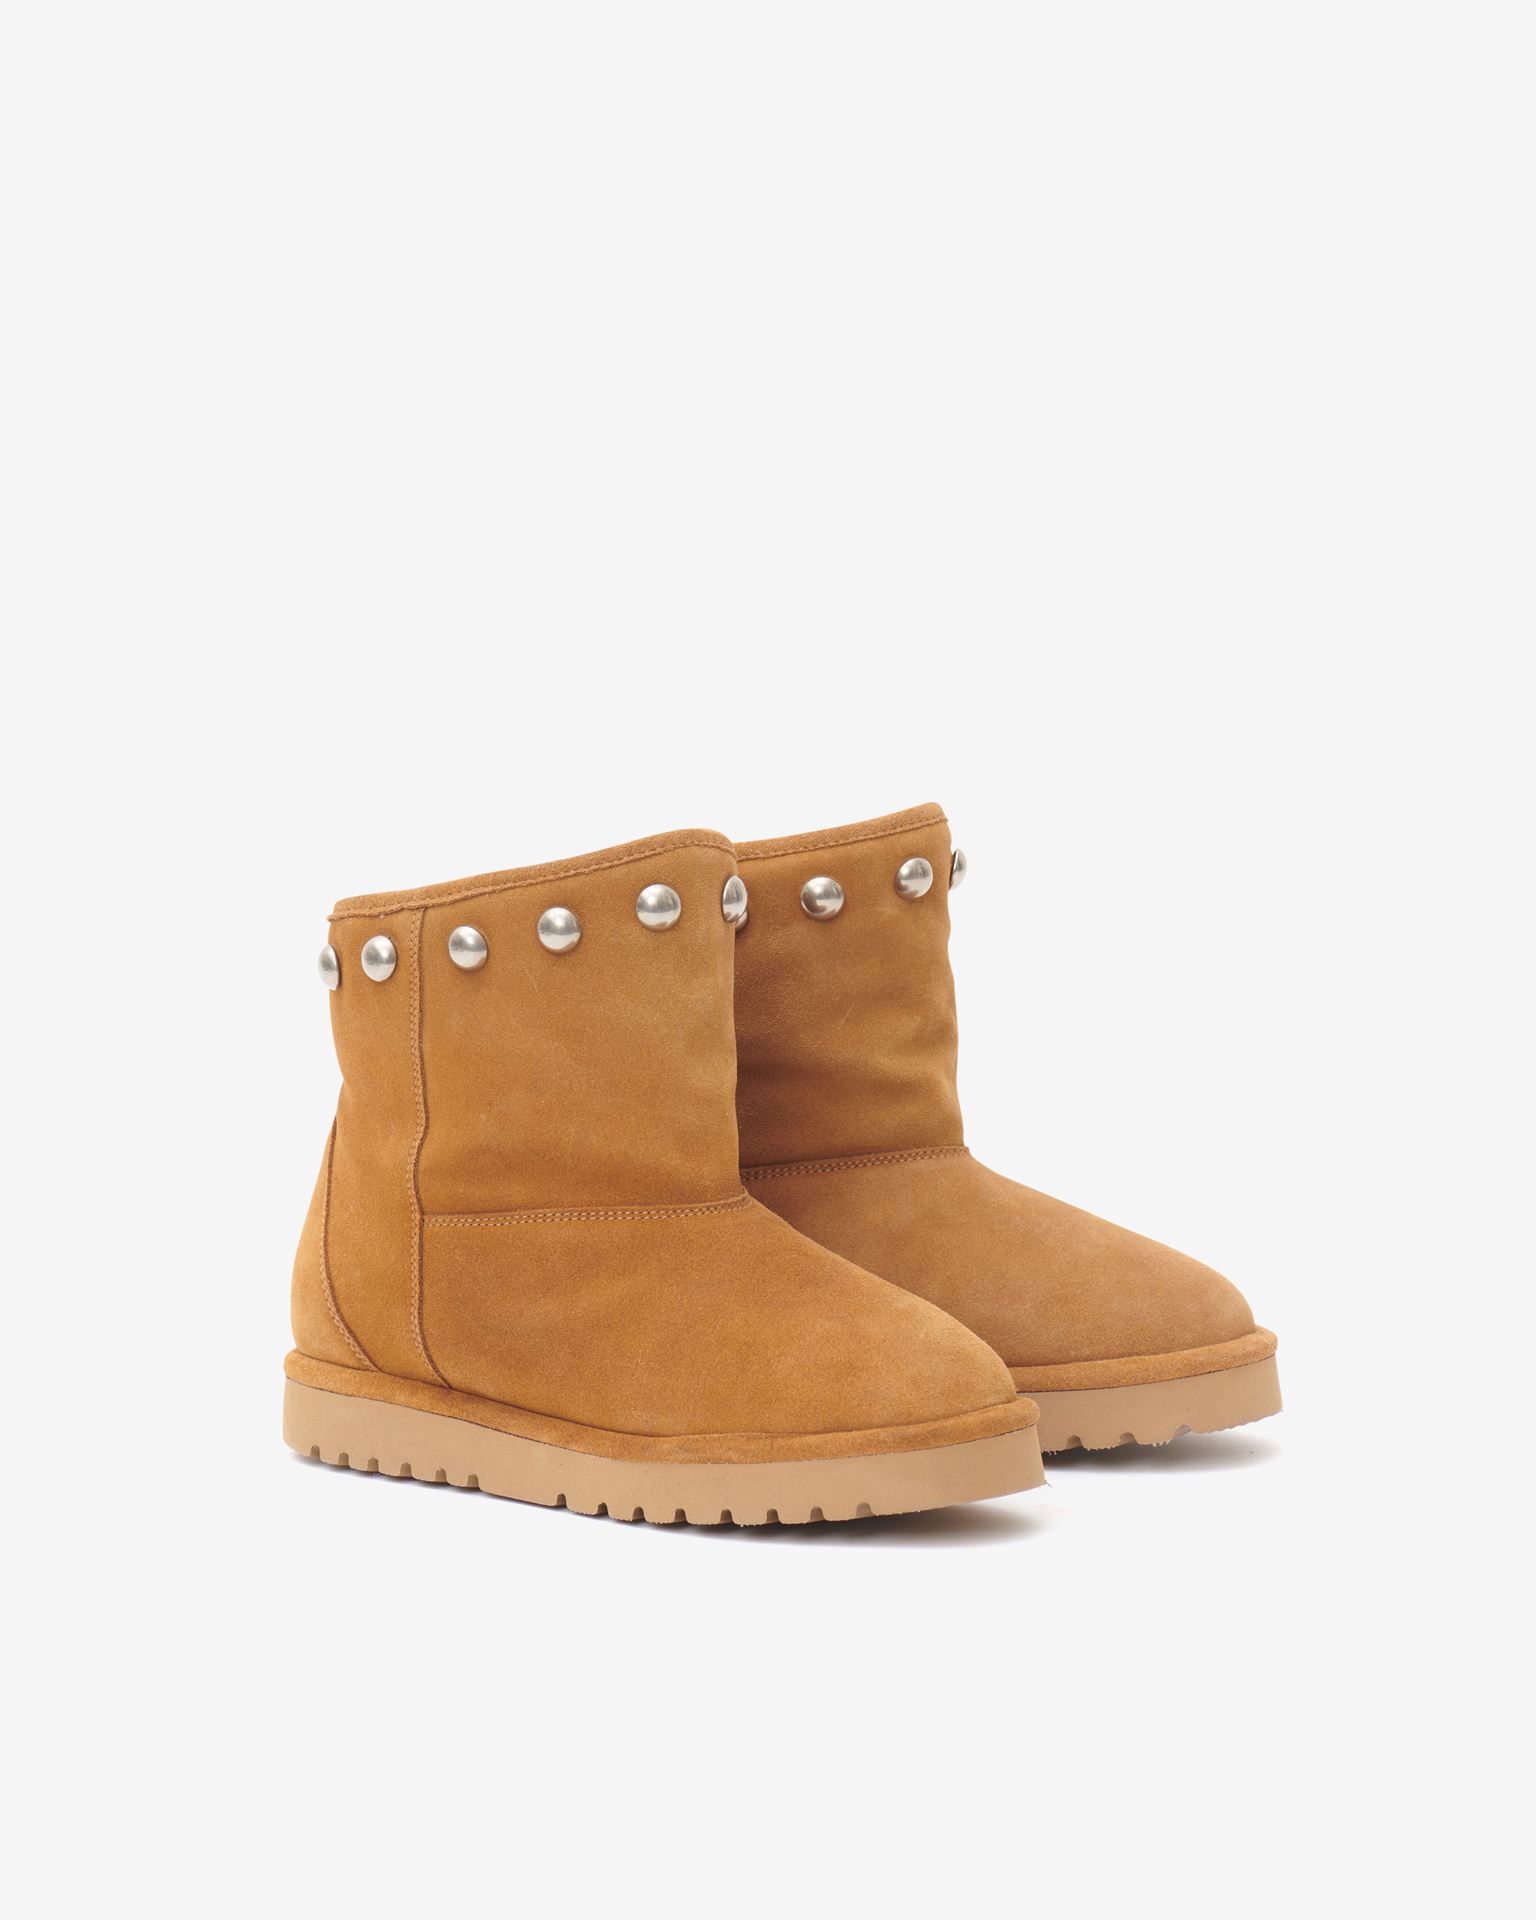 Isabel Marant, Kypsy Studded Snow Boots - Women - Brown